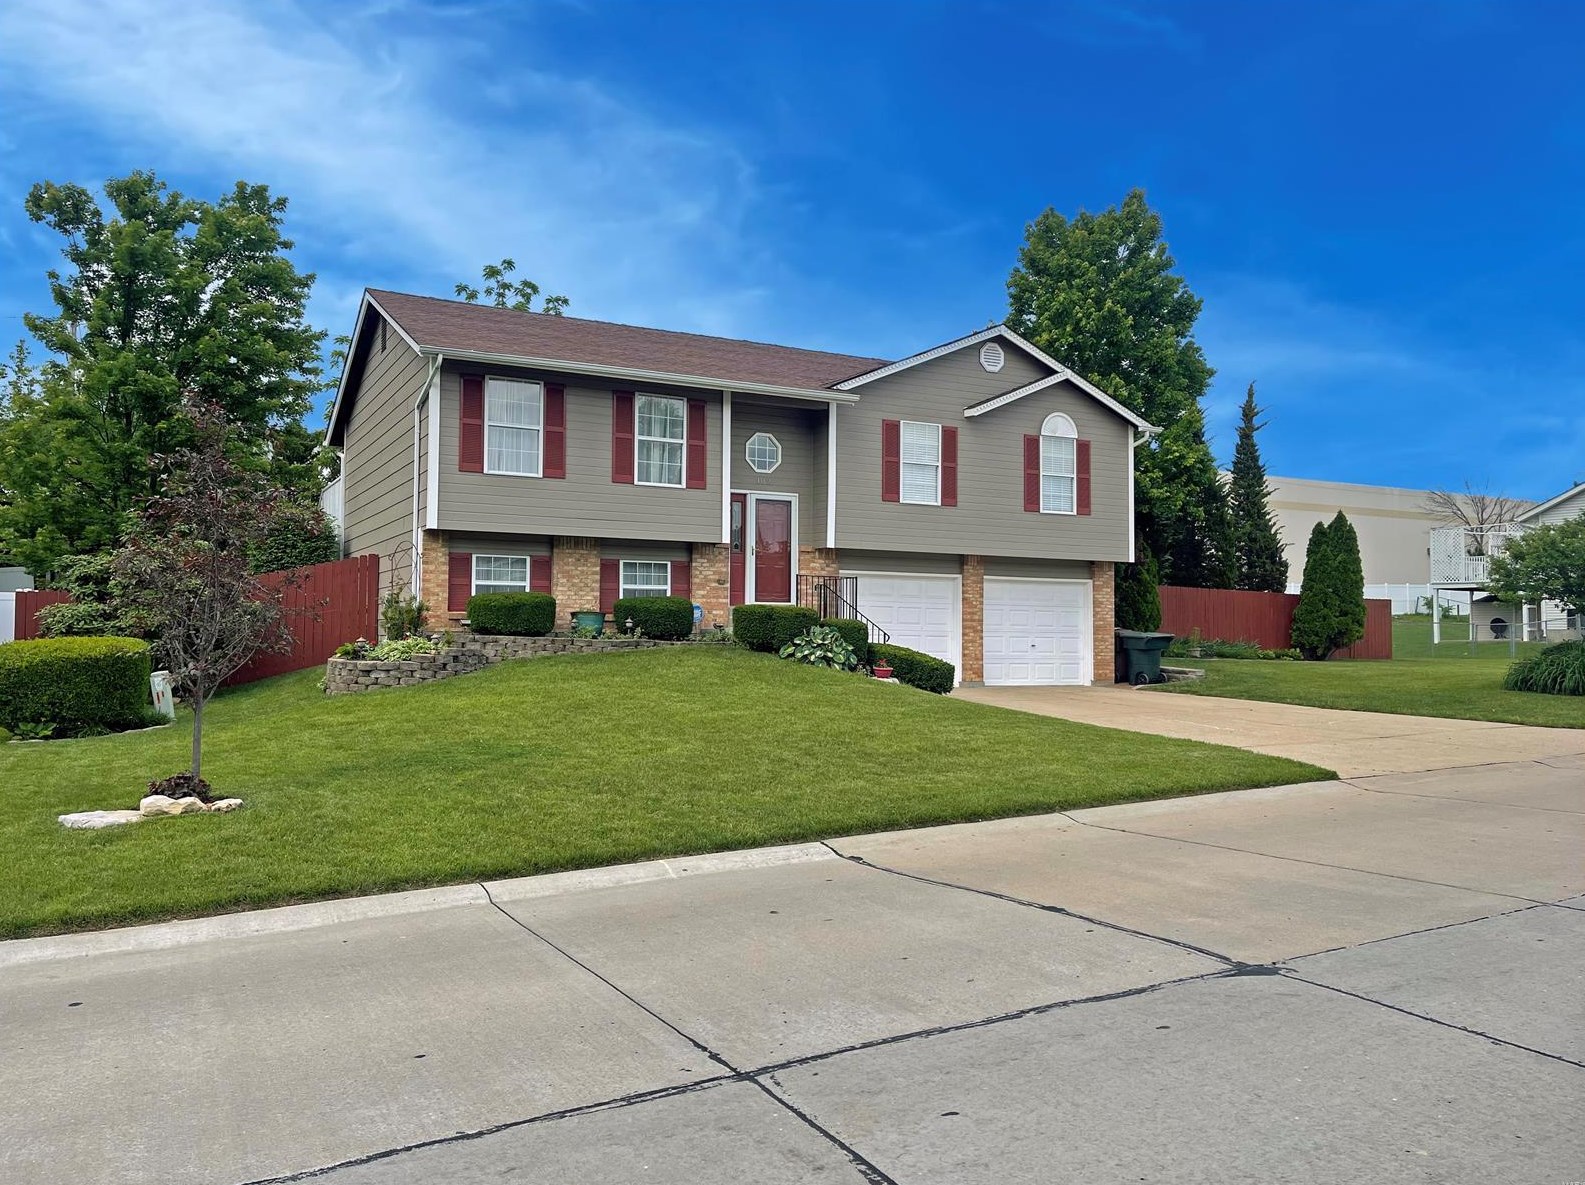 102 Four Winds Dr, Saint Peters, MO 63376